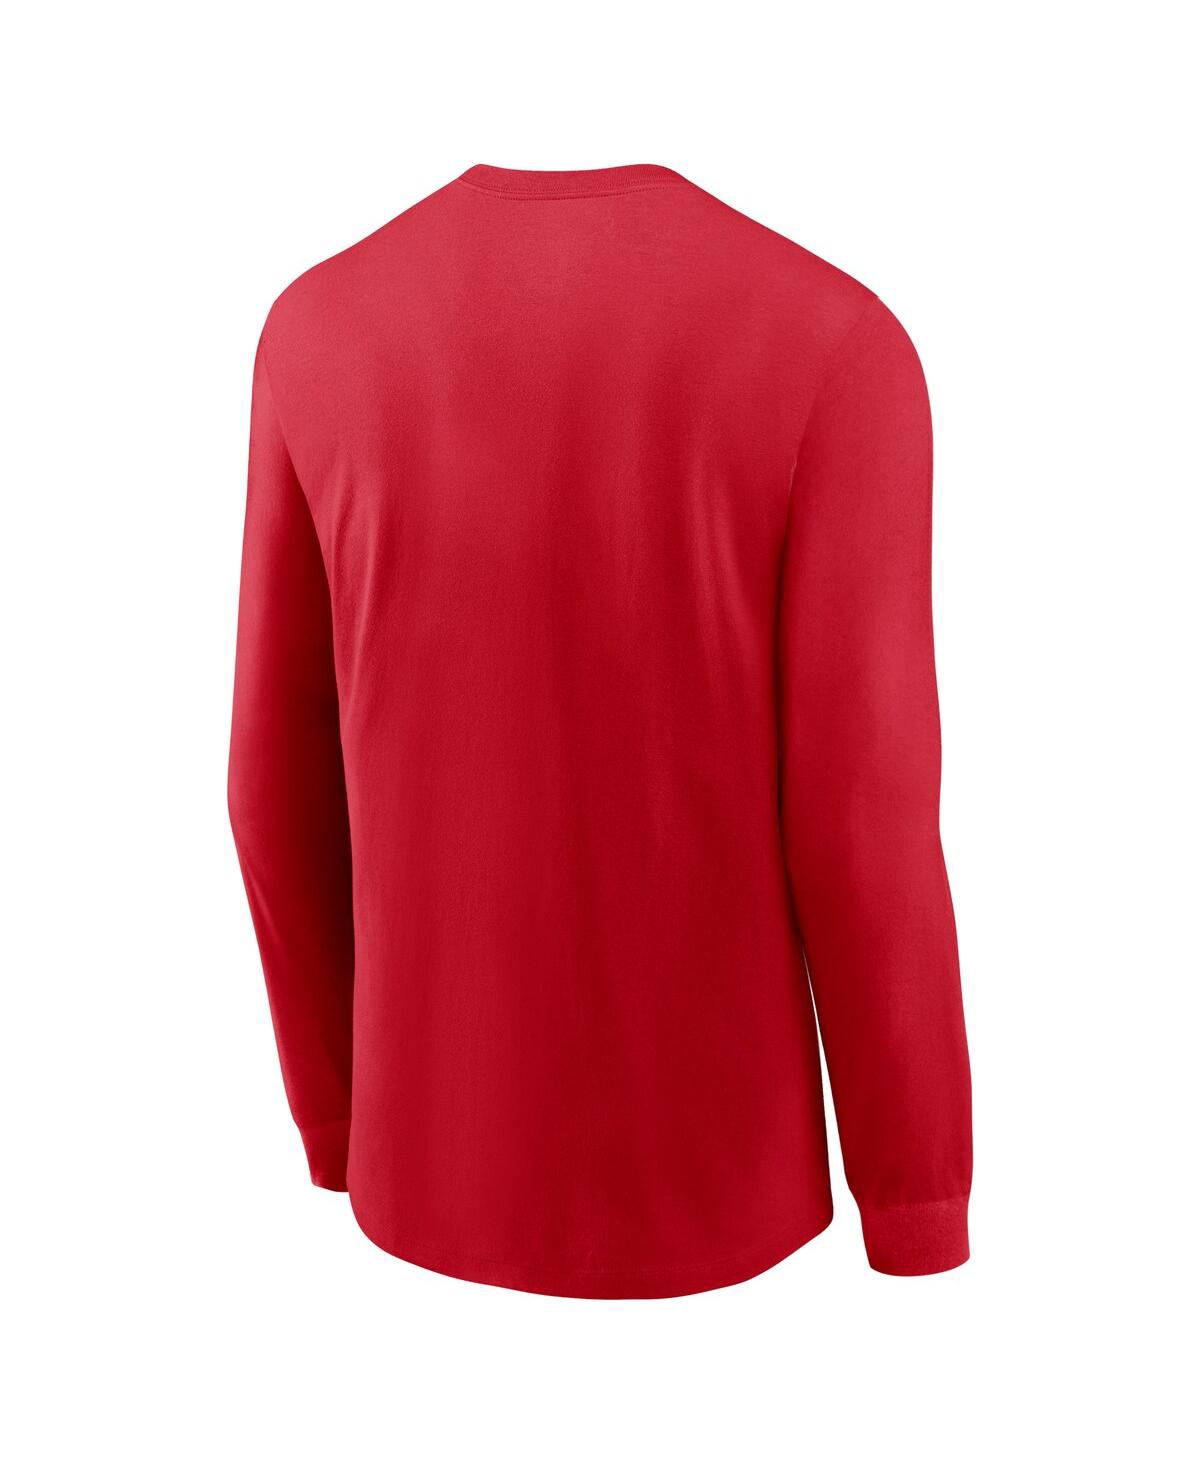 Shop Nike Men's  Red St. Louis Cardinals Repeater Long Sleeve T-shirt